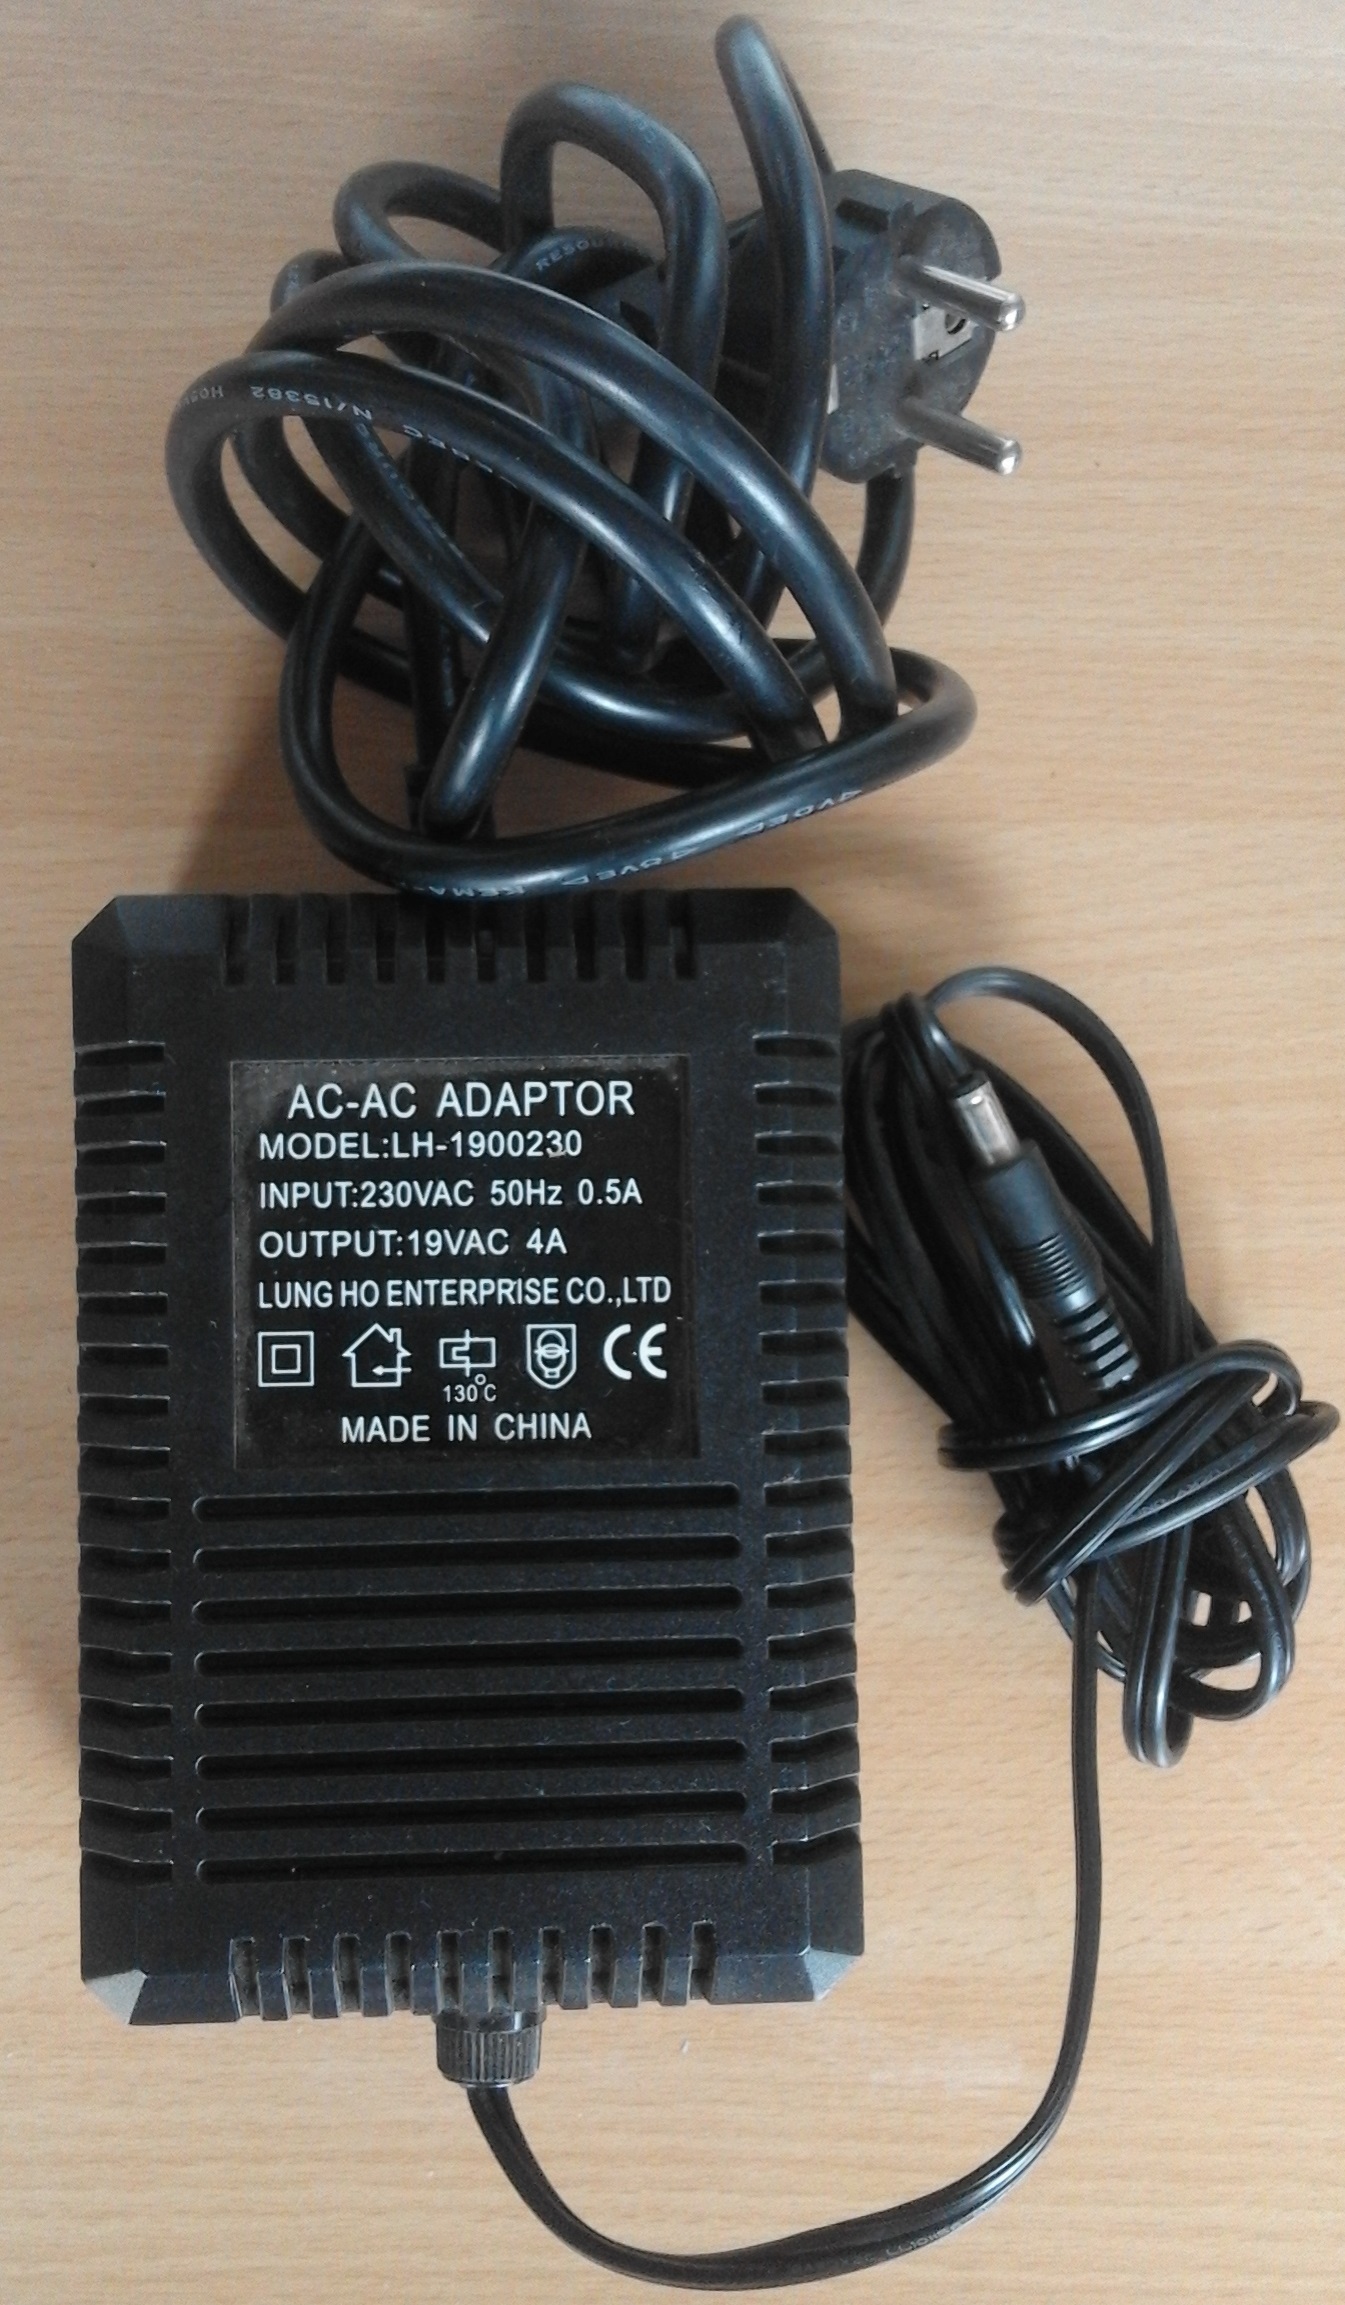 Ac to AC Adaptor 4amp 21Volts nominal power.